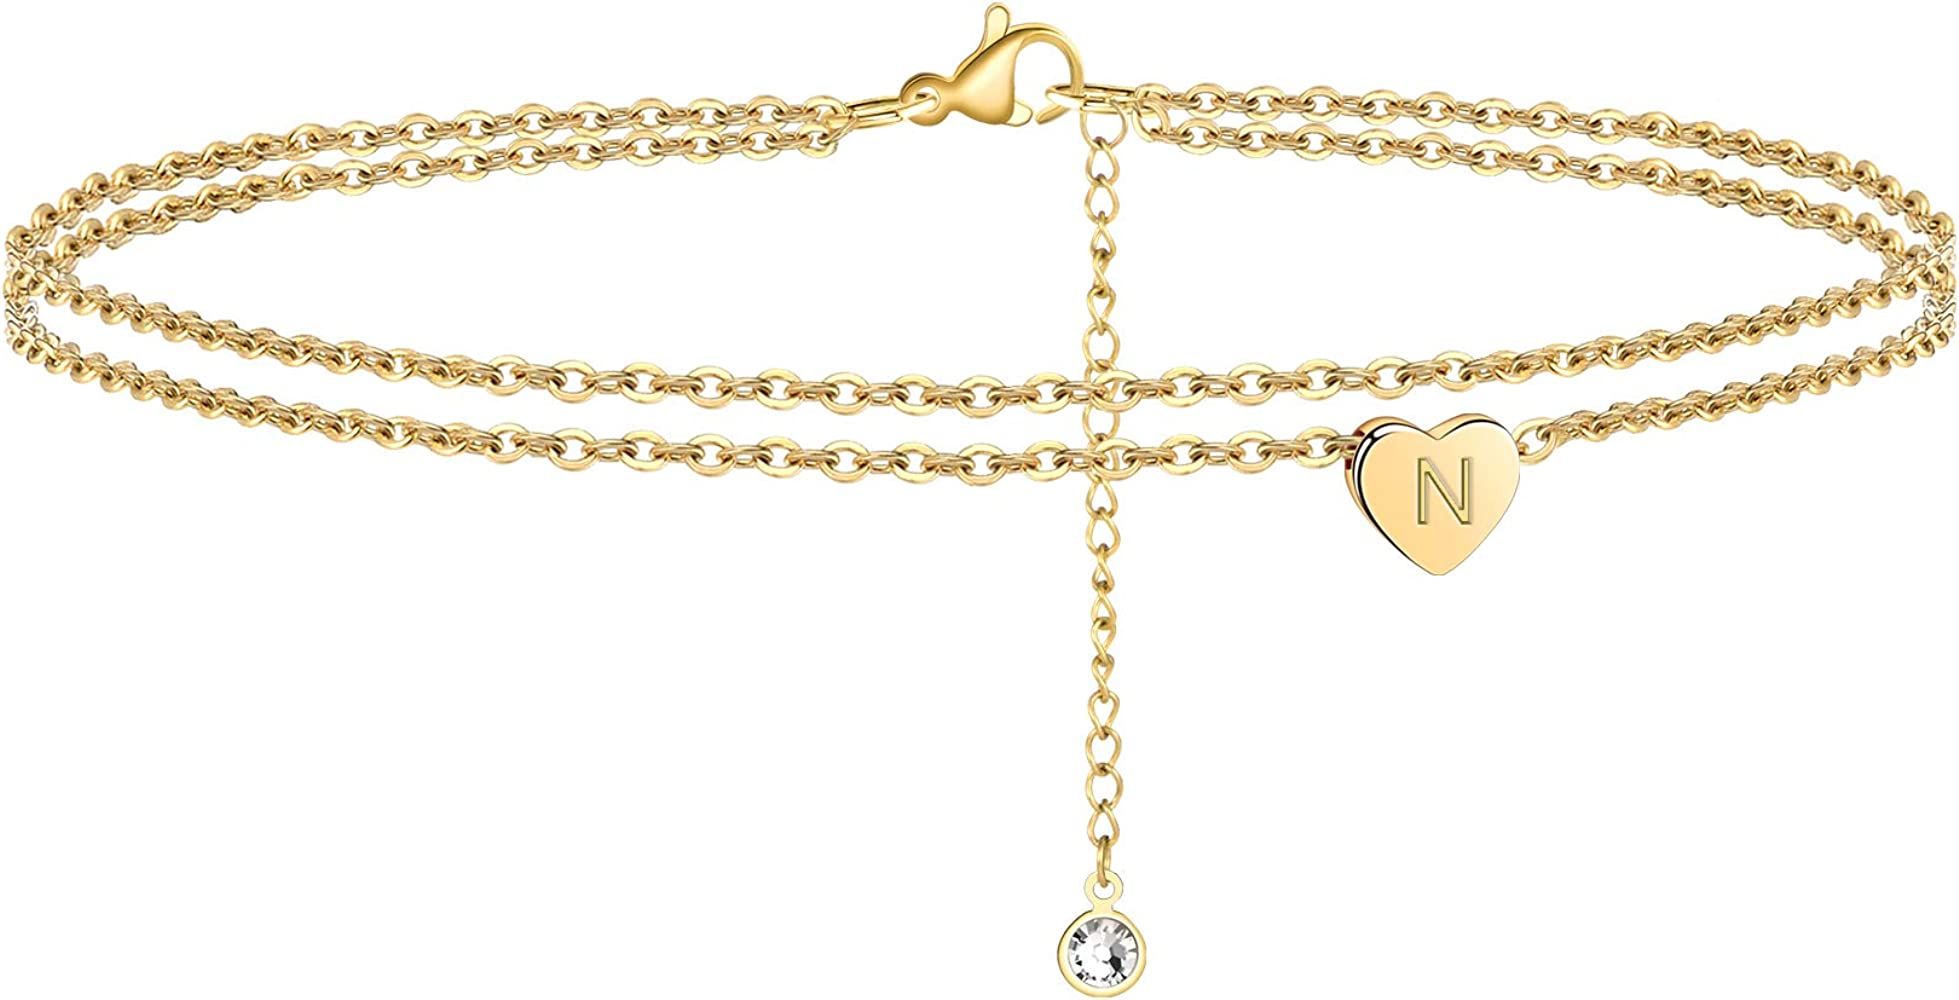 Turandoss Heart Initial Ankle Bracelets for Women, 14K Gold Filled Handmade Dainty Layered Anklet Le | Amazon (US)